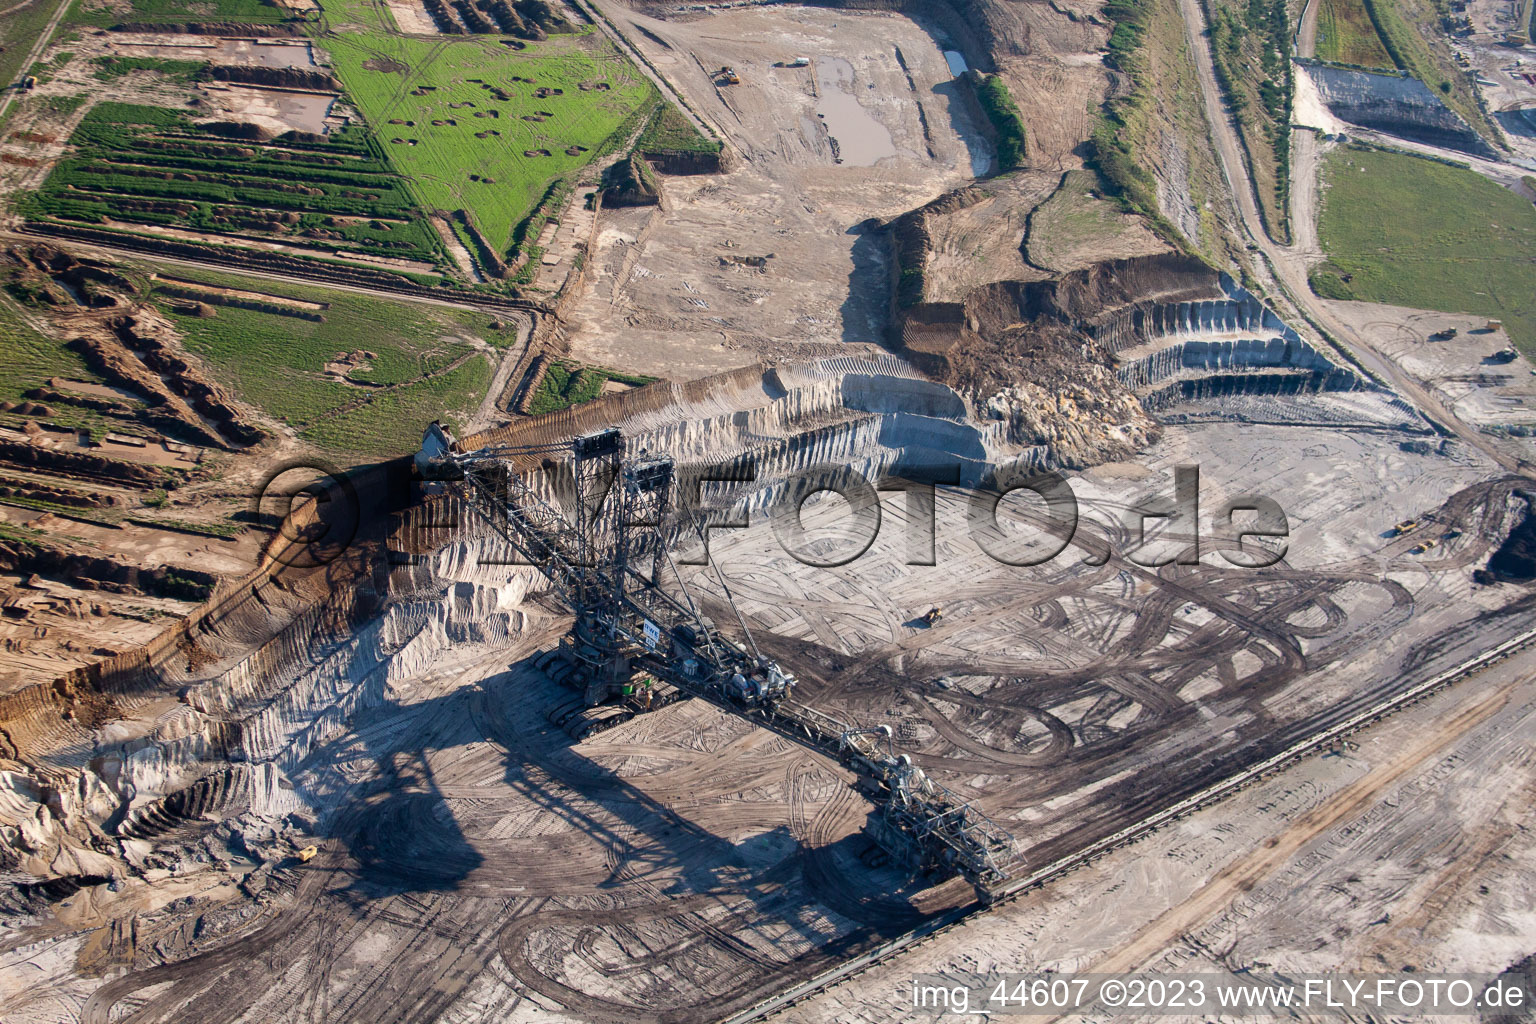 Bird's eye view of Opencast brown coal mining in Inden in the state North Rhine-Westphalia, Germany